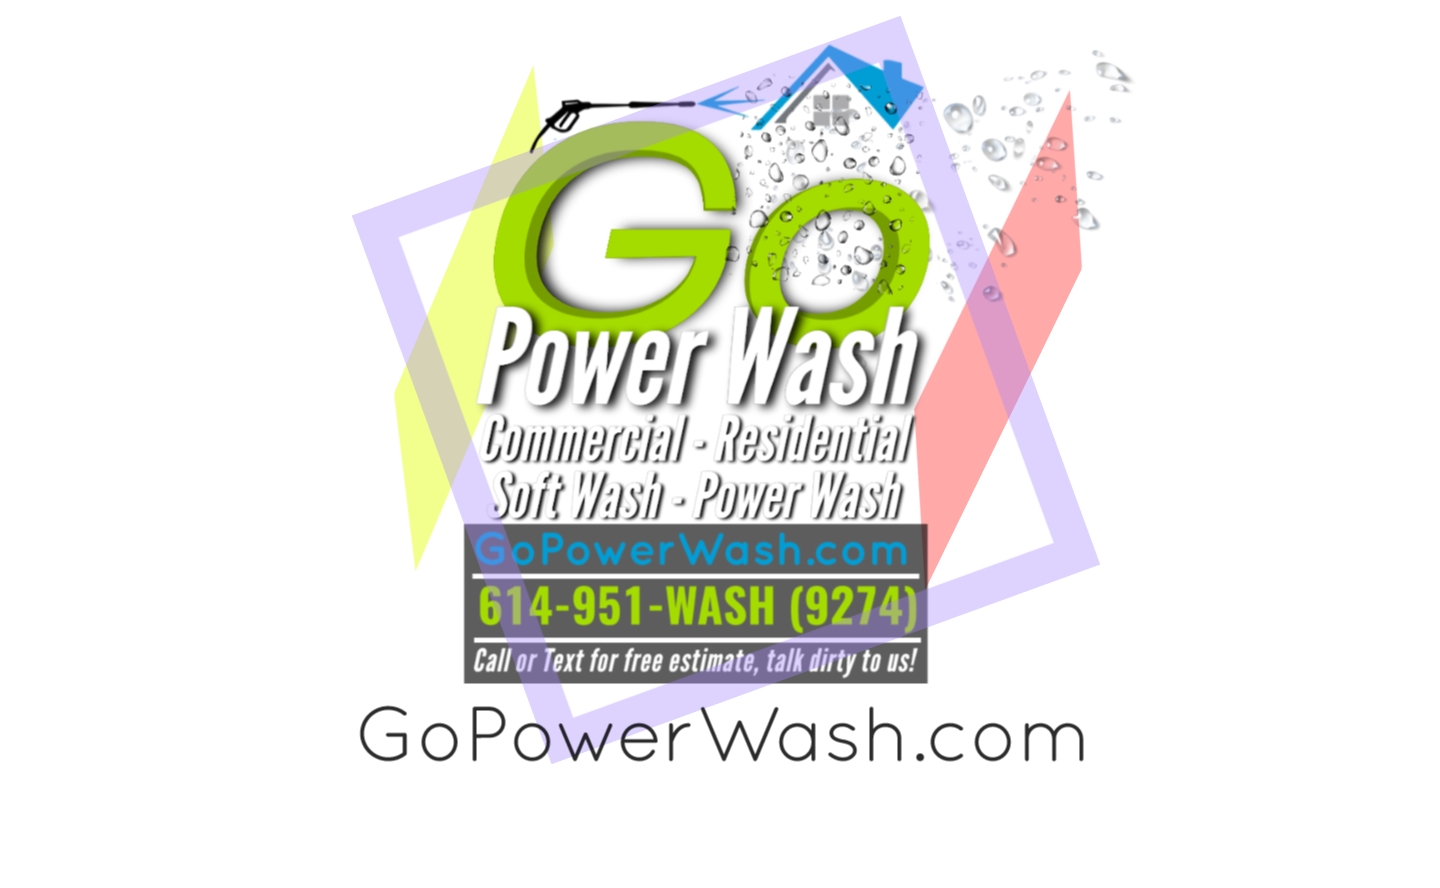 About Go Power Wash